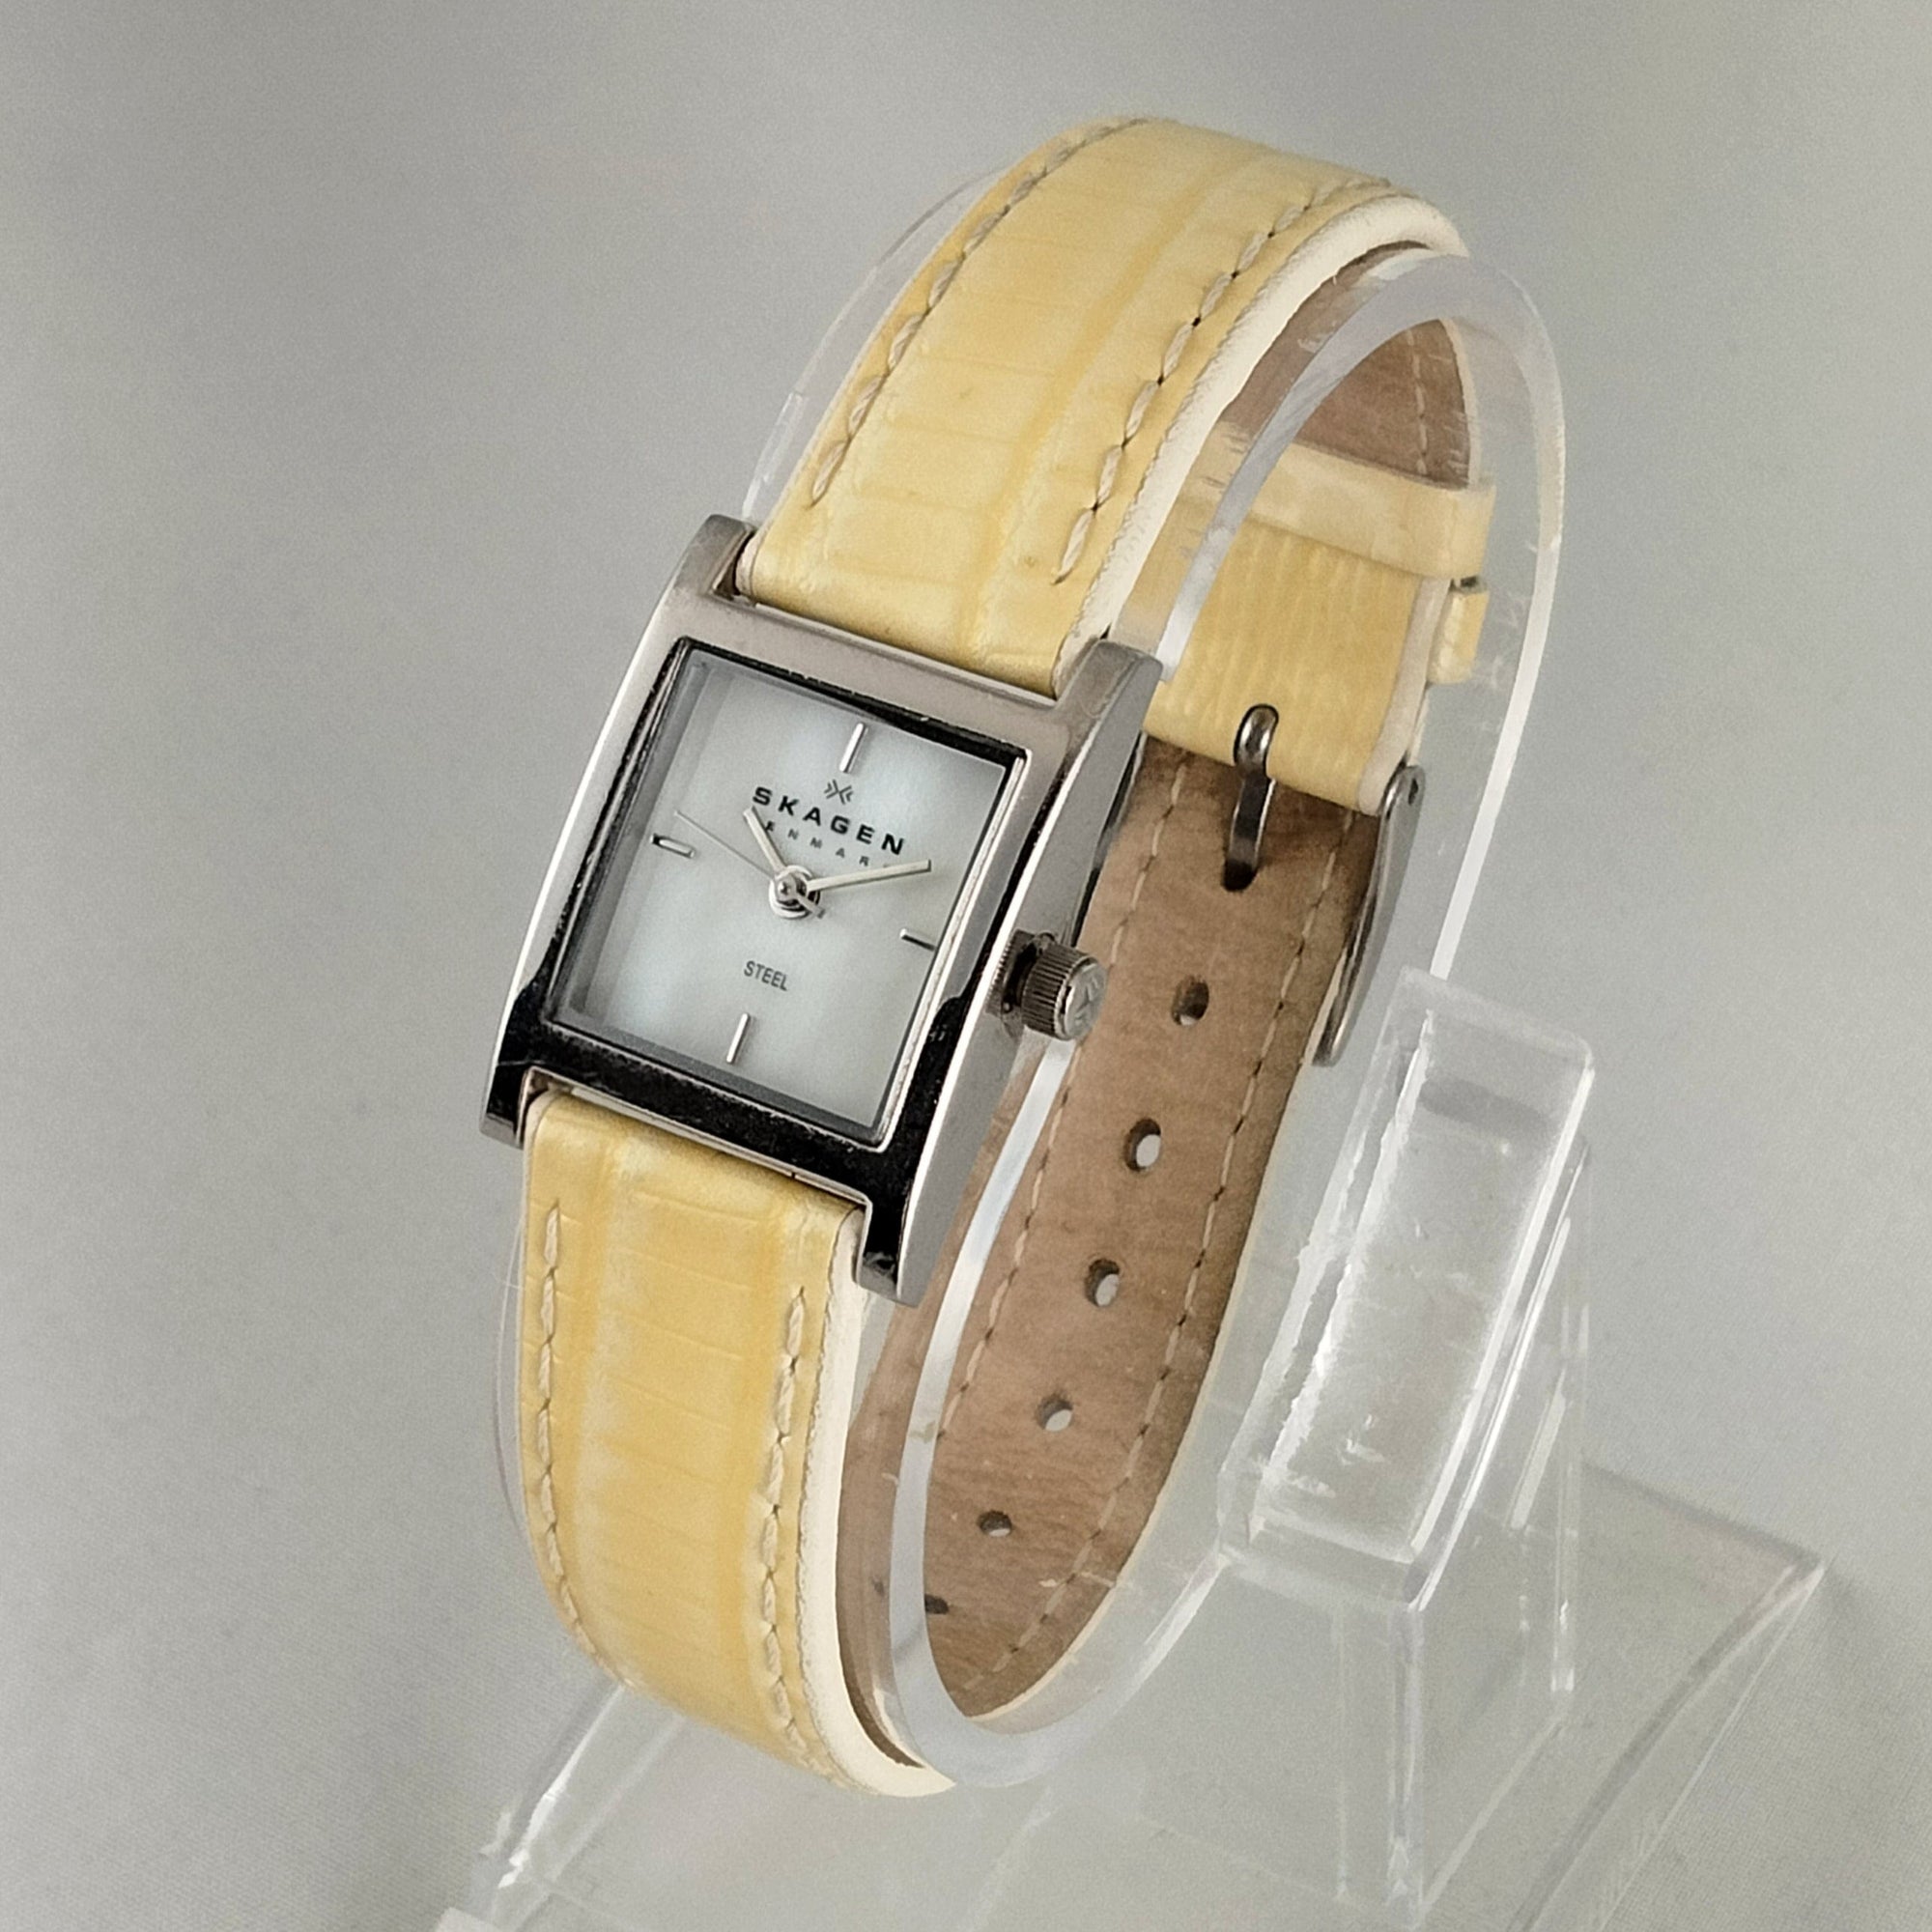 I Like Mikes Mid Century Modern Watches Skagen Women's Stainless Steel Square Watch, Mother of Pearl Dial, Yellow Leather Strap